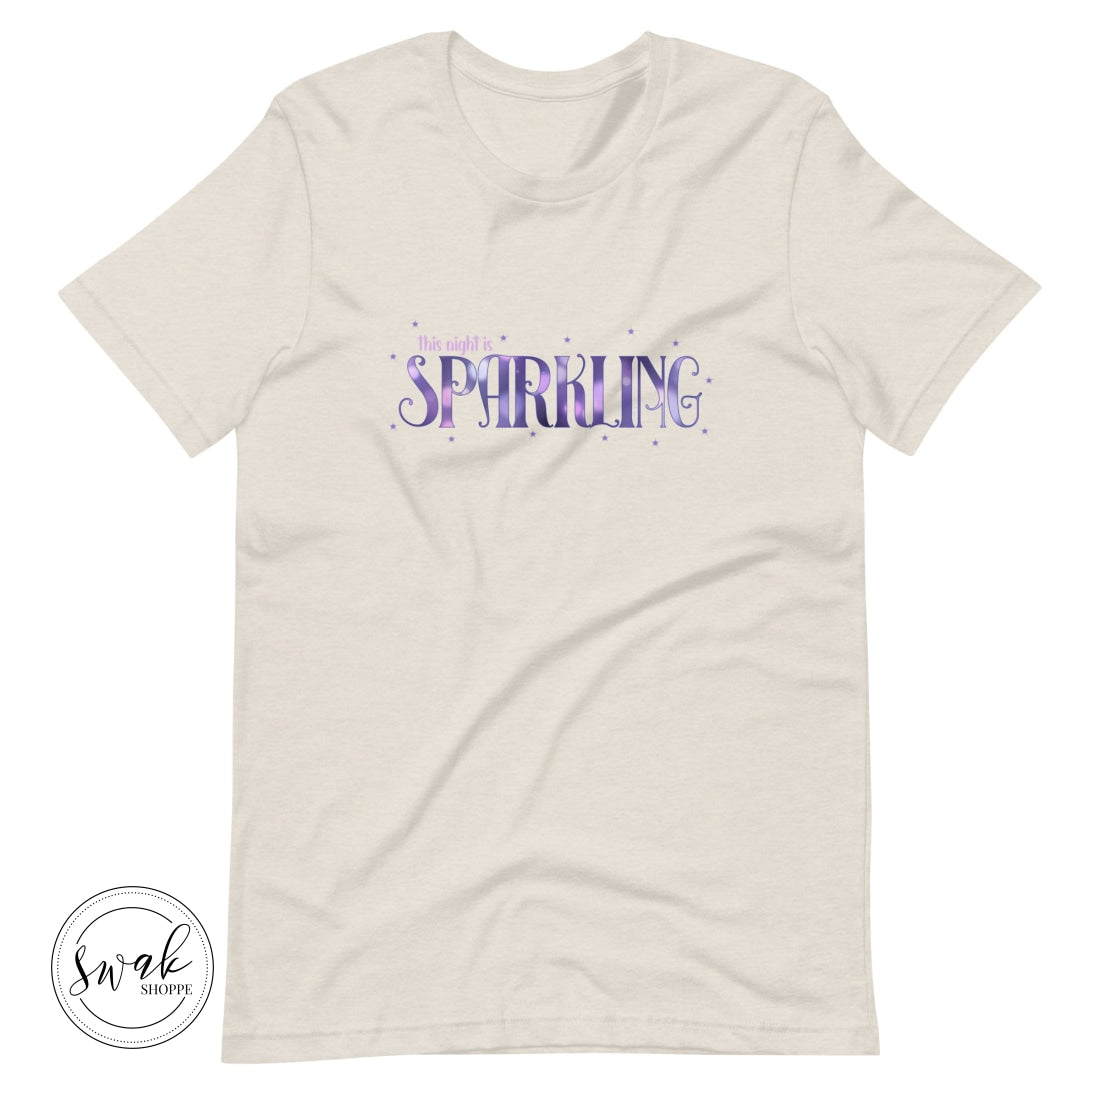 This Night Is Sparkling Unisex T-Shirt